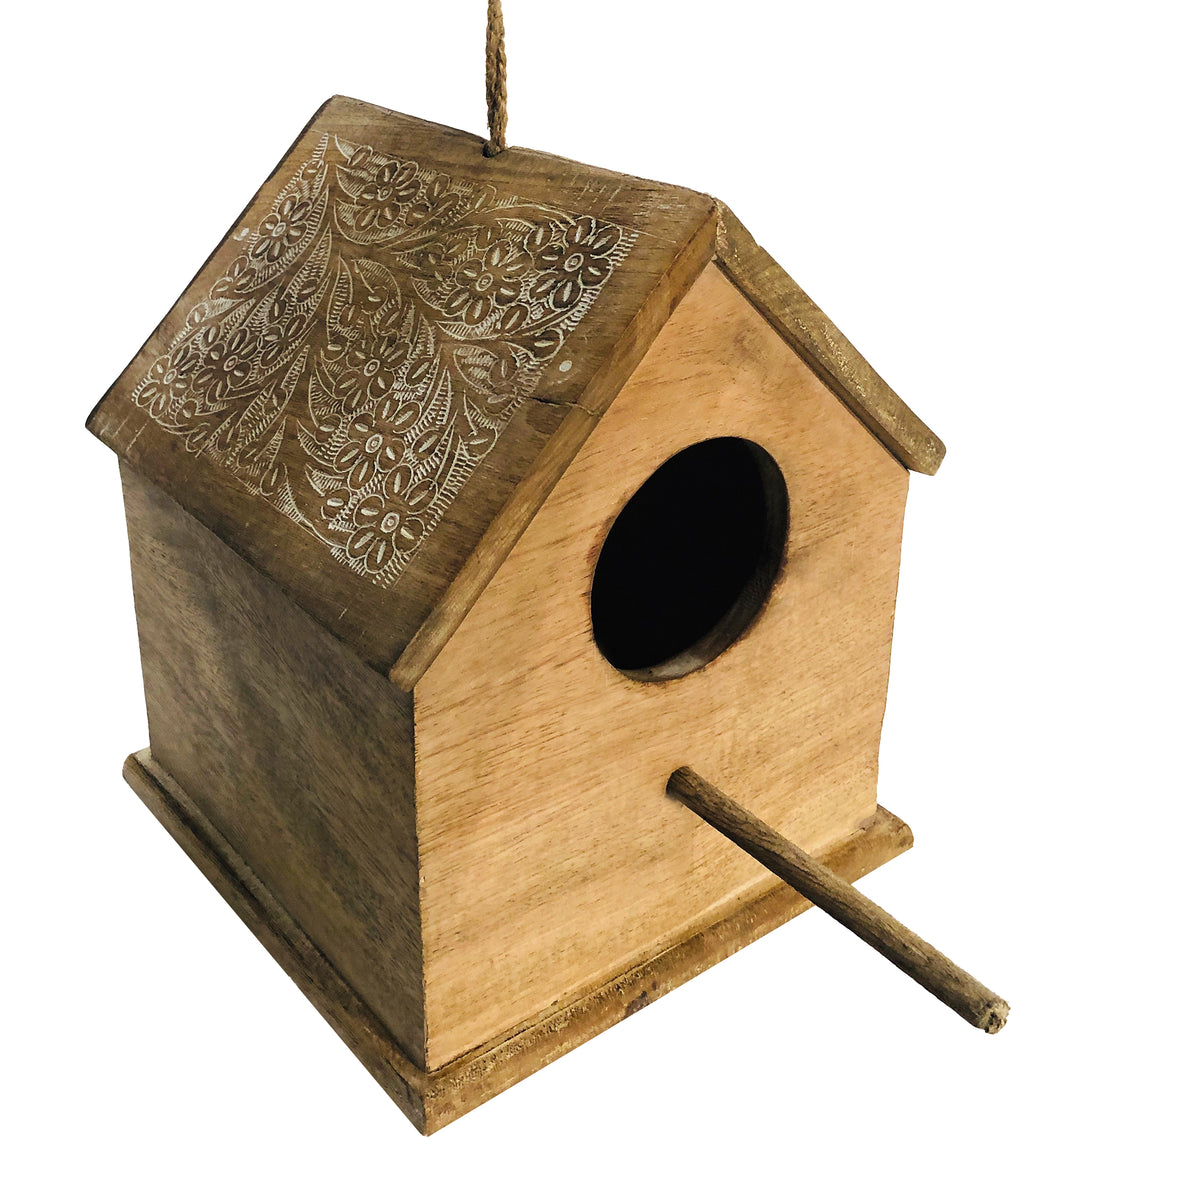 Hut Shape Decorative Mango Wood Hanging Bird House with Engraved Details, Distressed Brown - UPT-214885